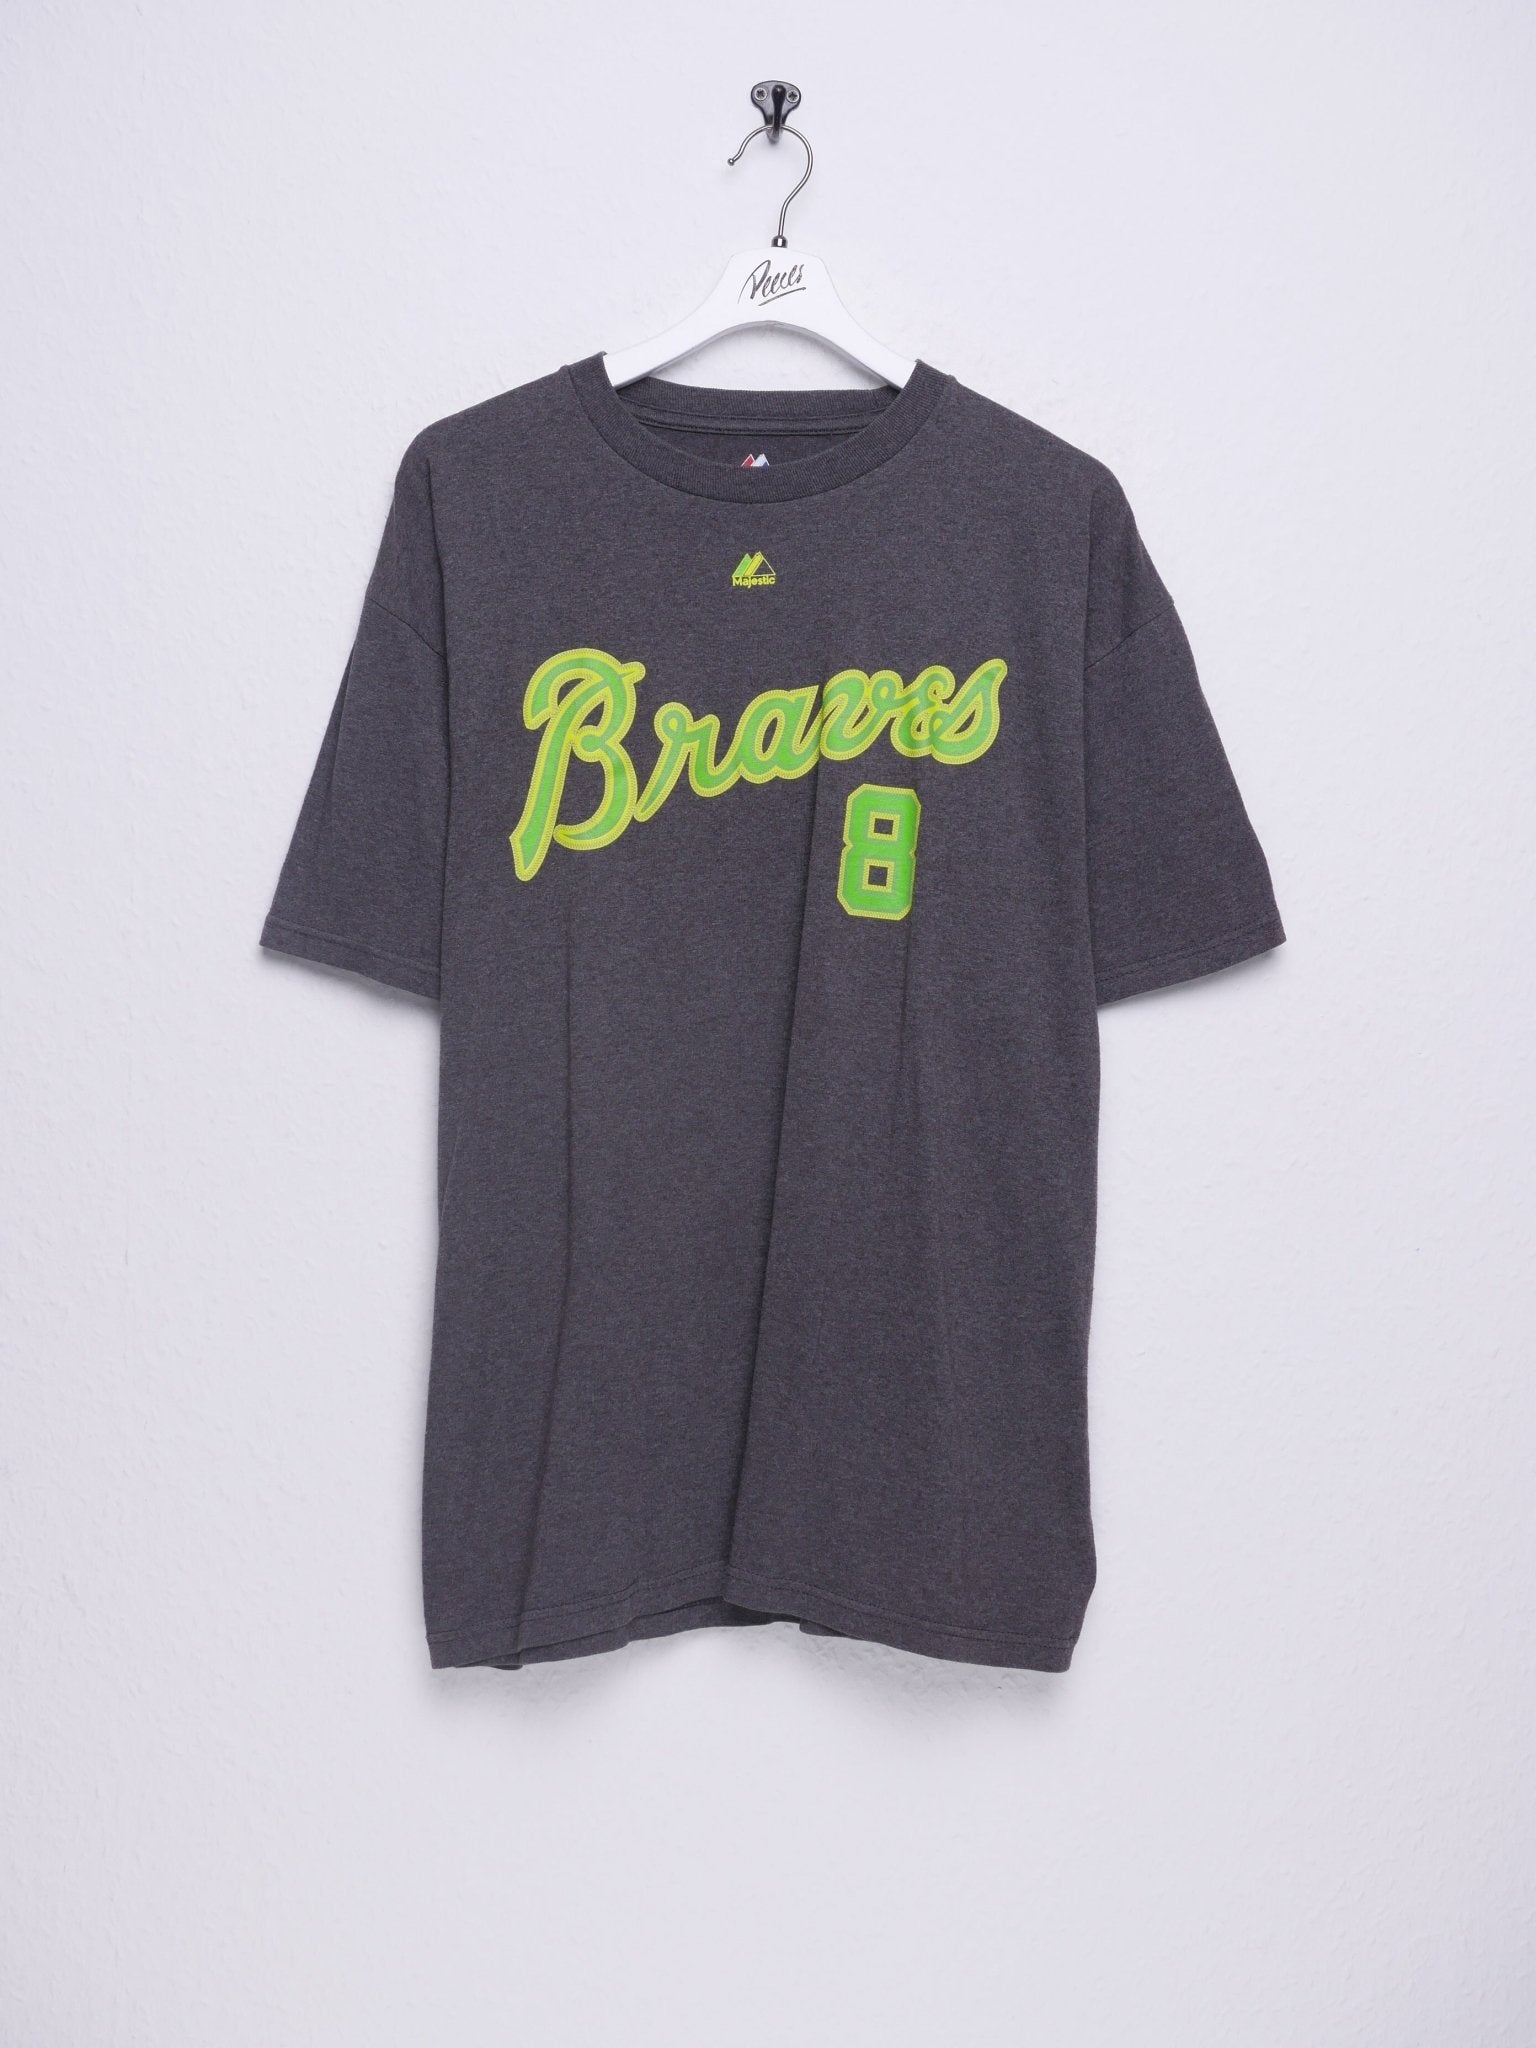 Braves printed Spellout grey Shirt - Peeces